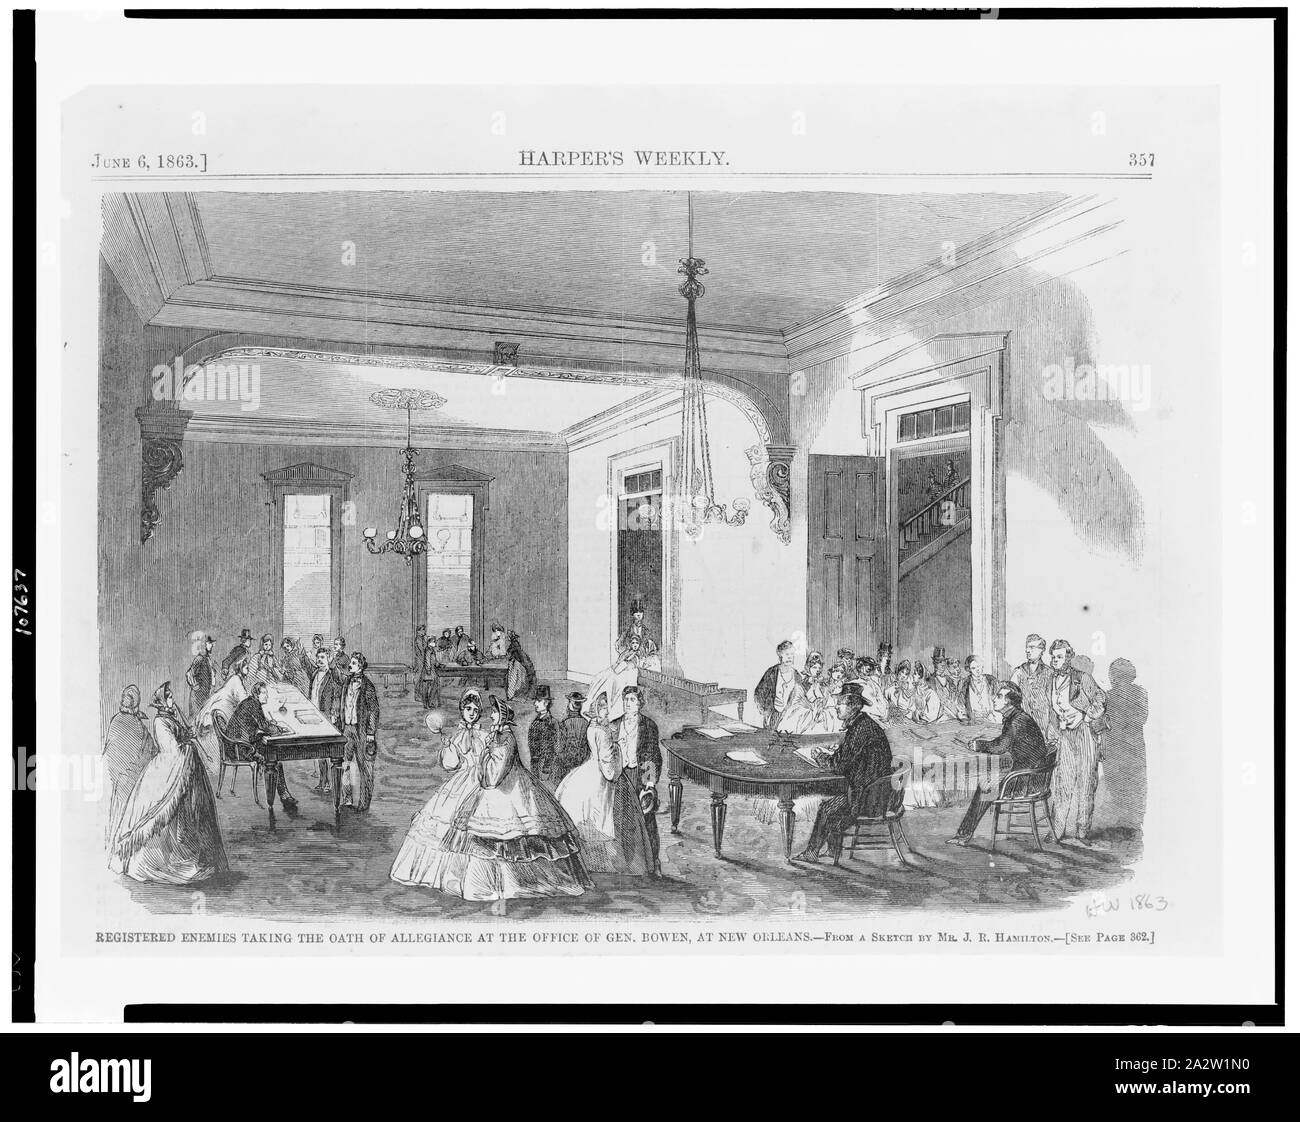 Registered enemies taking the oath of allegiance at the office of Gen. Bowen, at New Orleans / From a sketch by Mr. J.R. Hamilton. Stock Photo